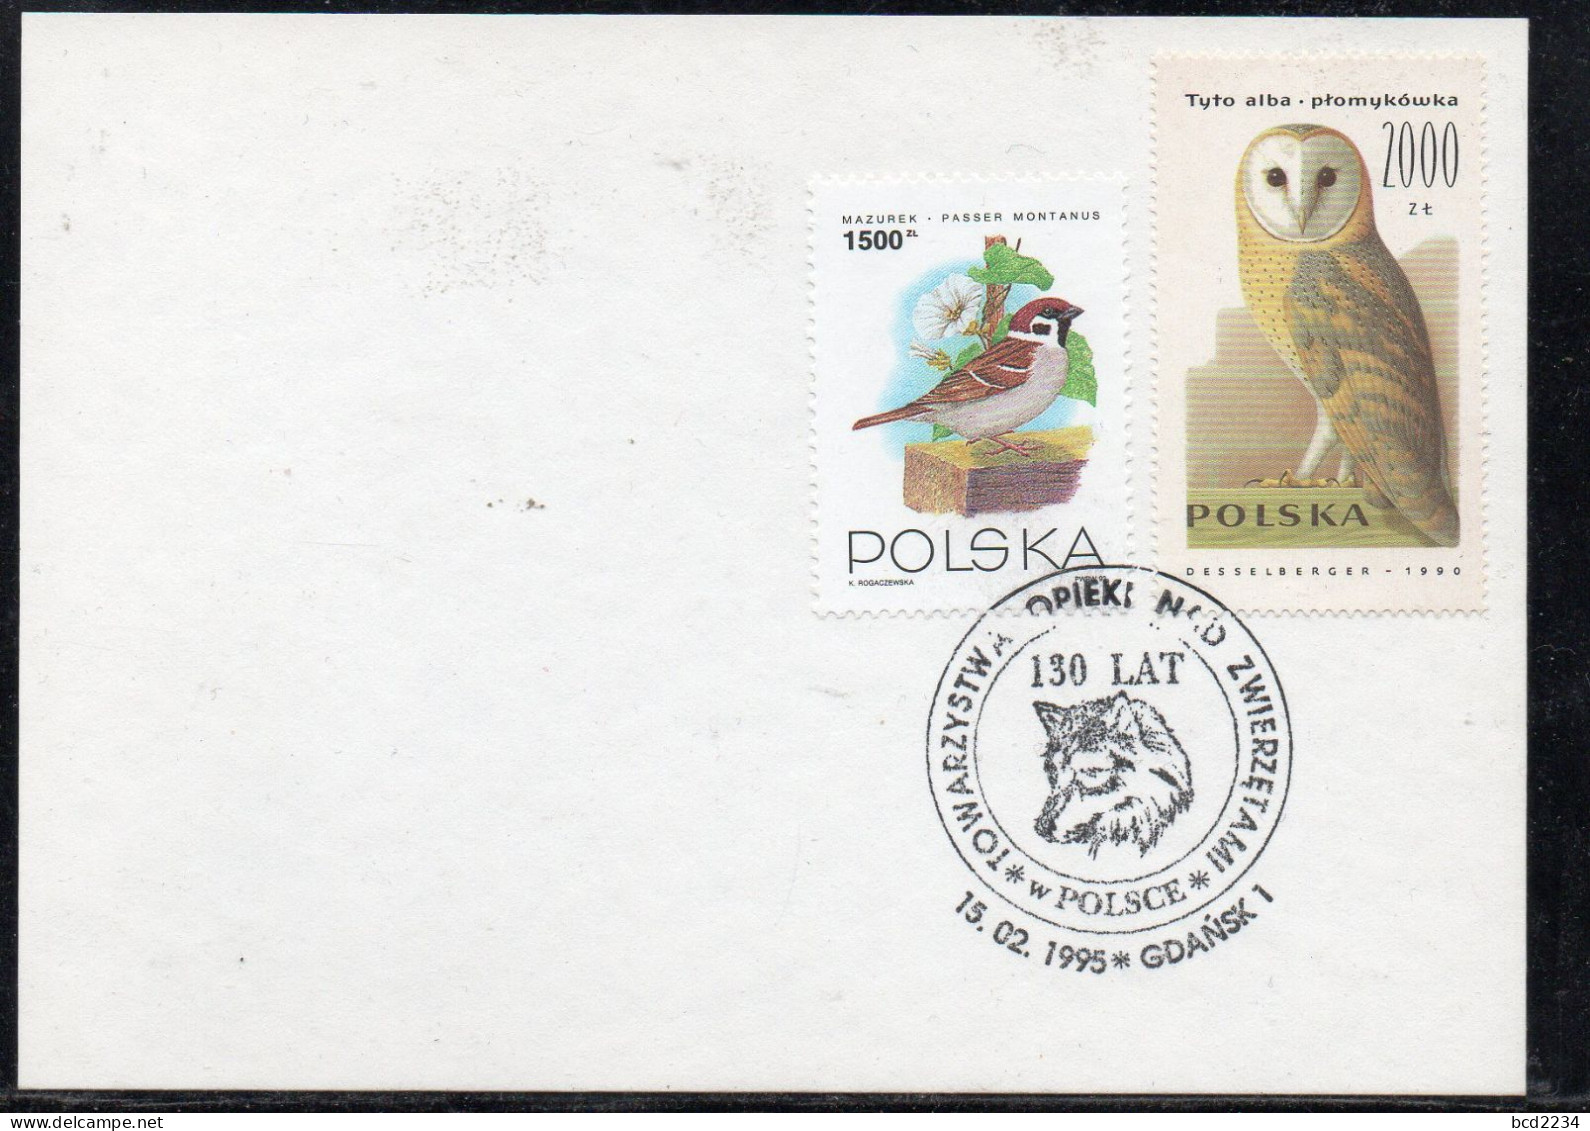 POLAND 1995 130 YEARS OF POLISH ASSOCIATION FOR THE PROTECTION OF ANIMALS GDANSK SPECIAL CANCEL ON CARD WOLF - Honden